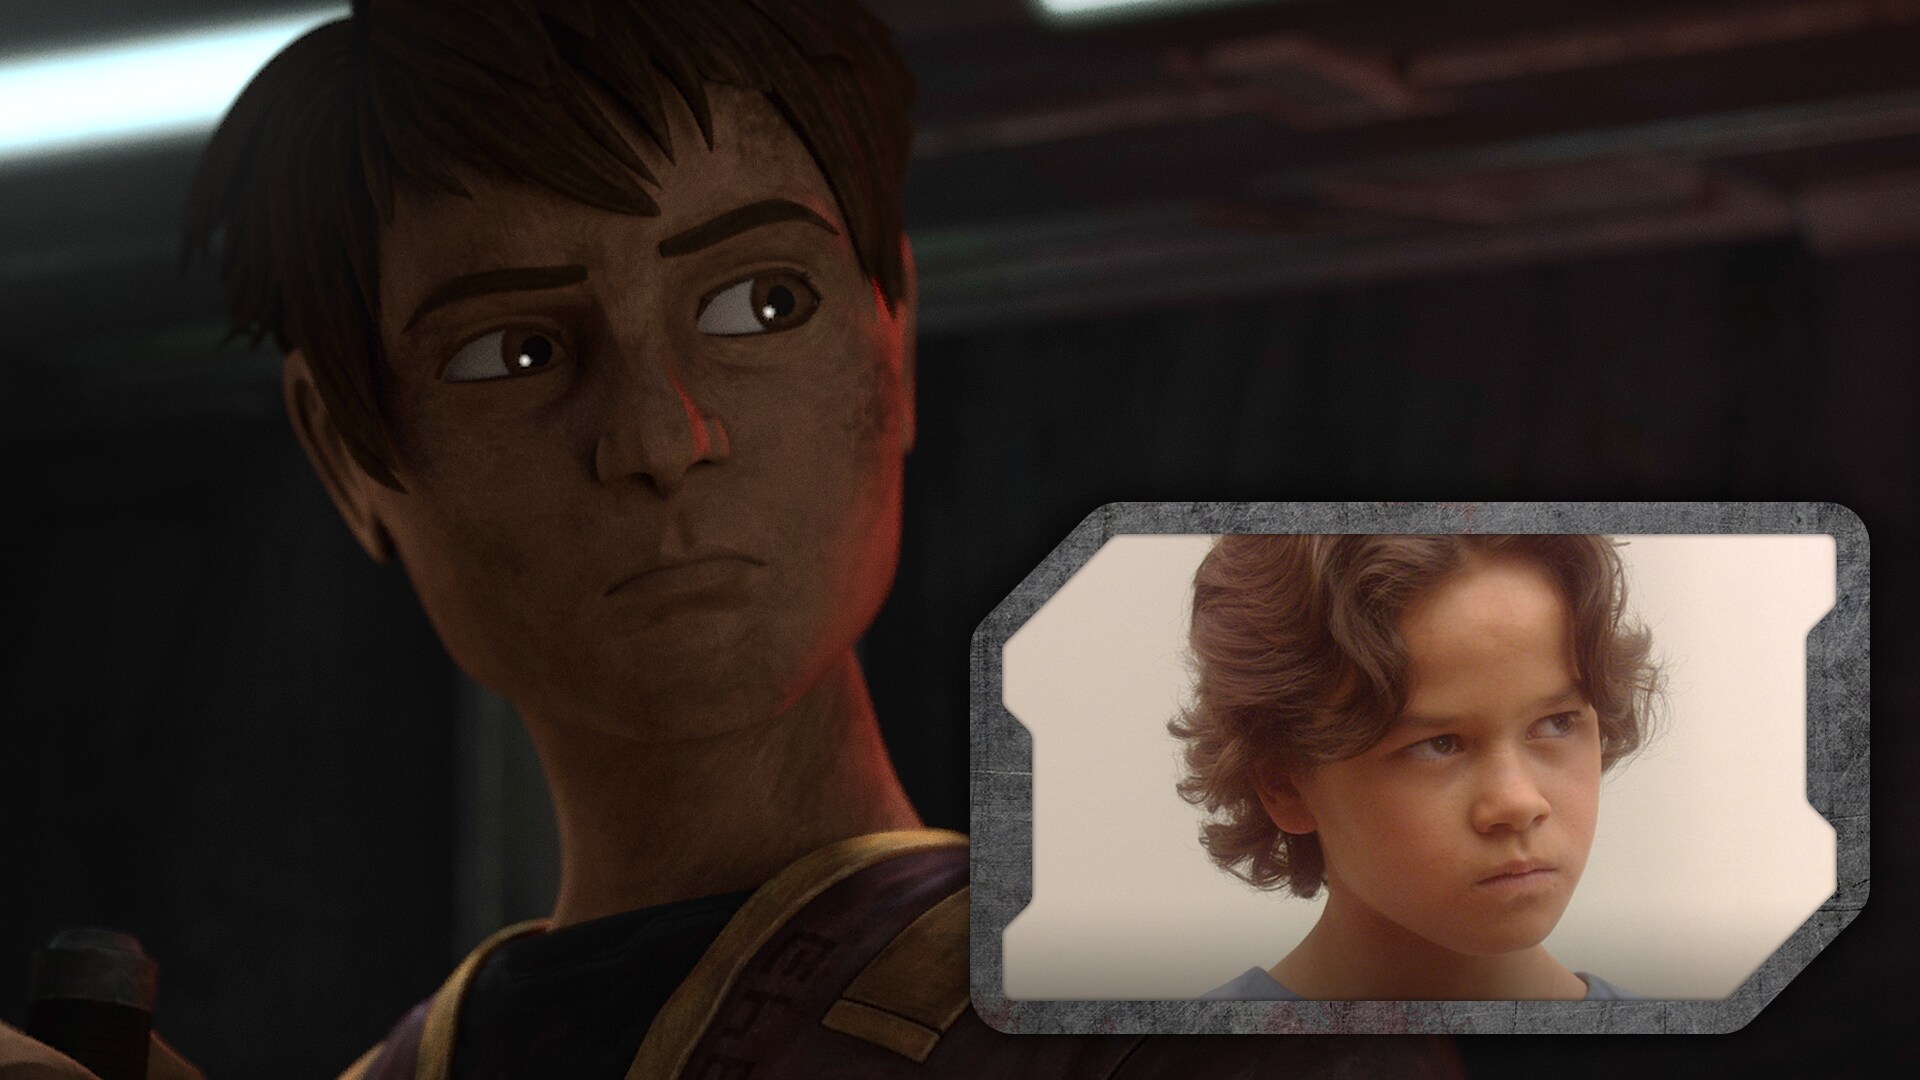 Clone Cadet Mox is voiced by Daniel Logan, who played the young Boba Fett in Star Wars: Attack of...